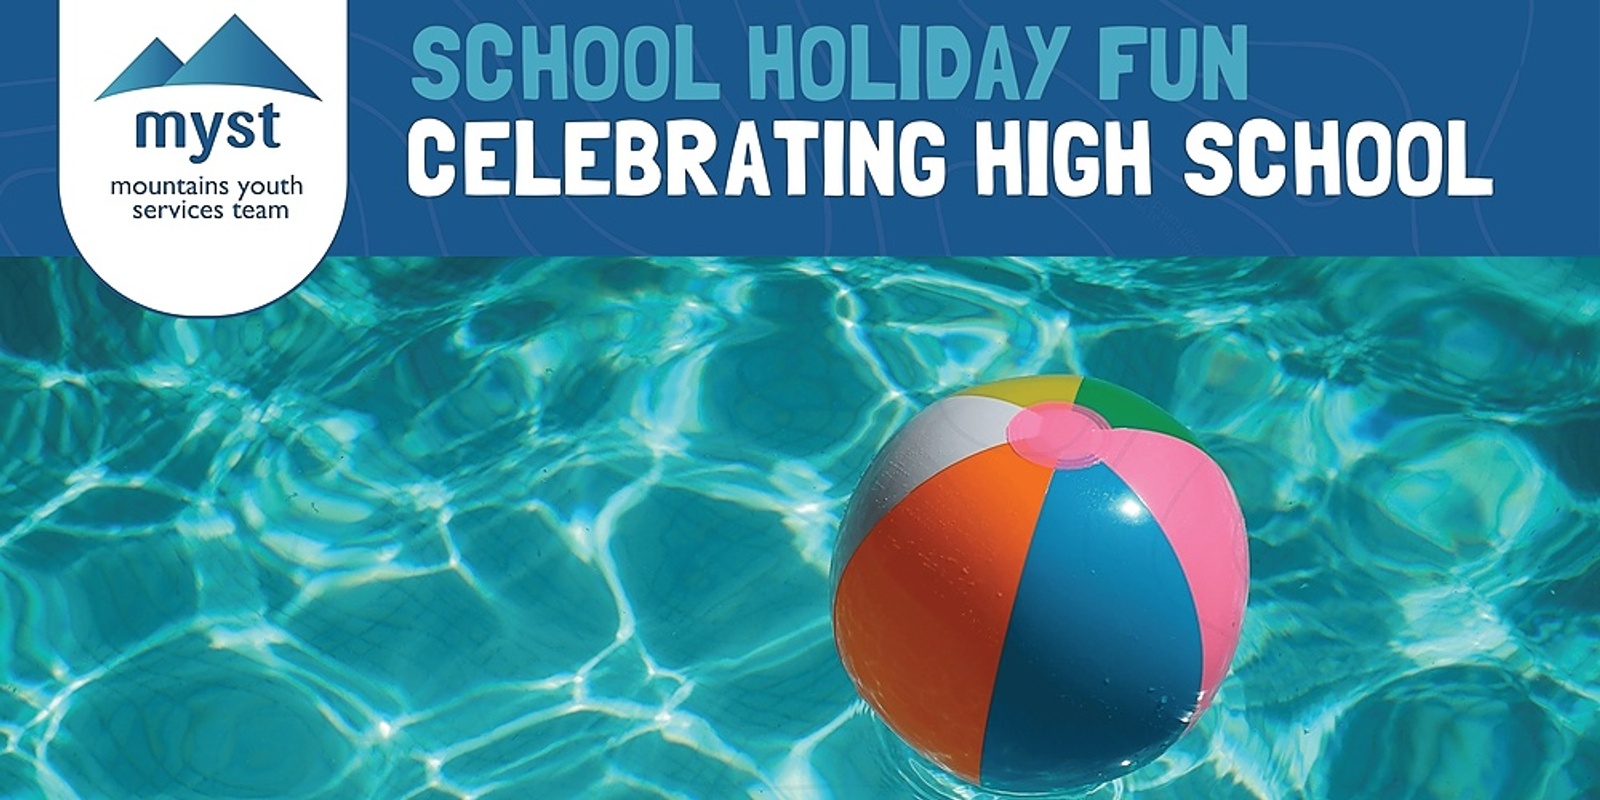 Banner image for Holiday Fun - Let's Celebrate going to High School